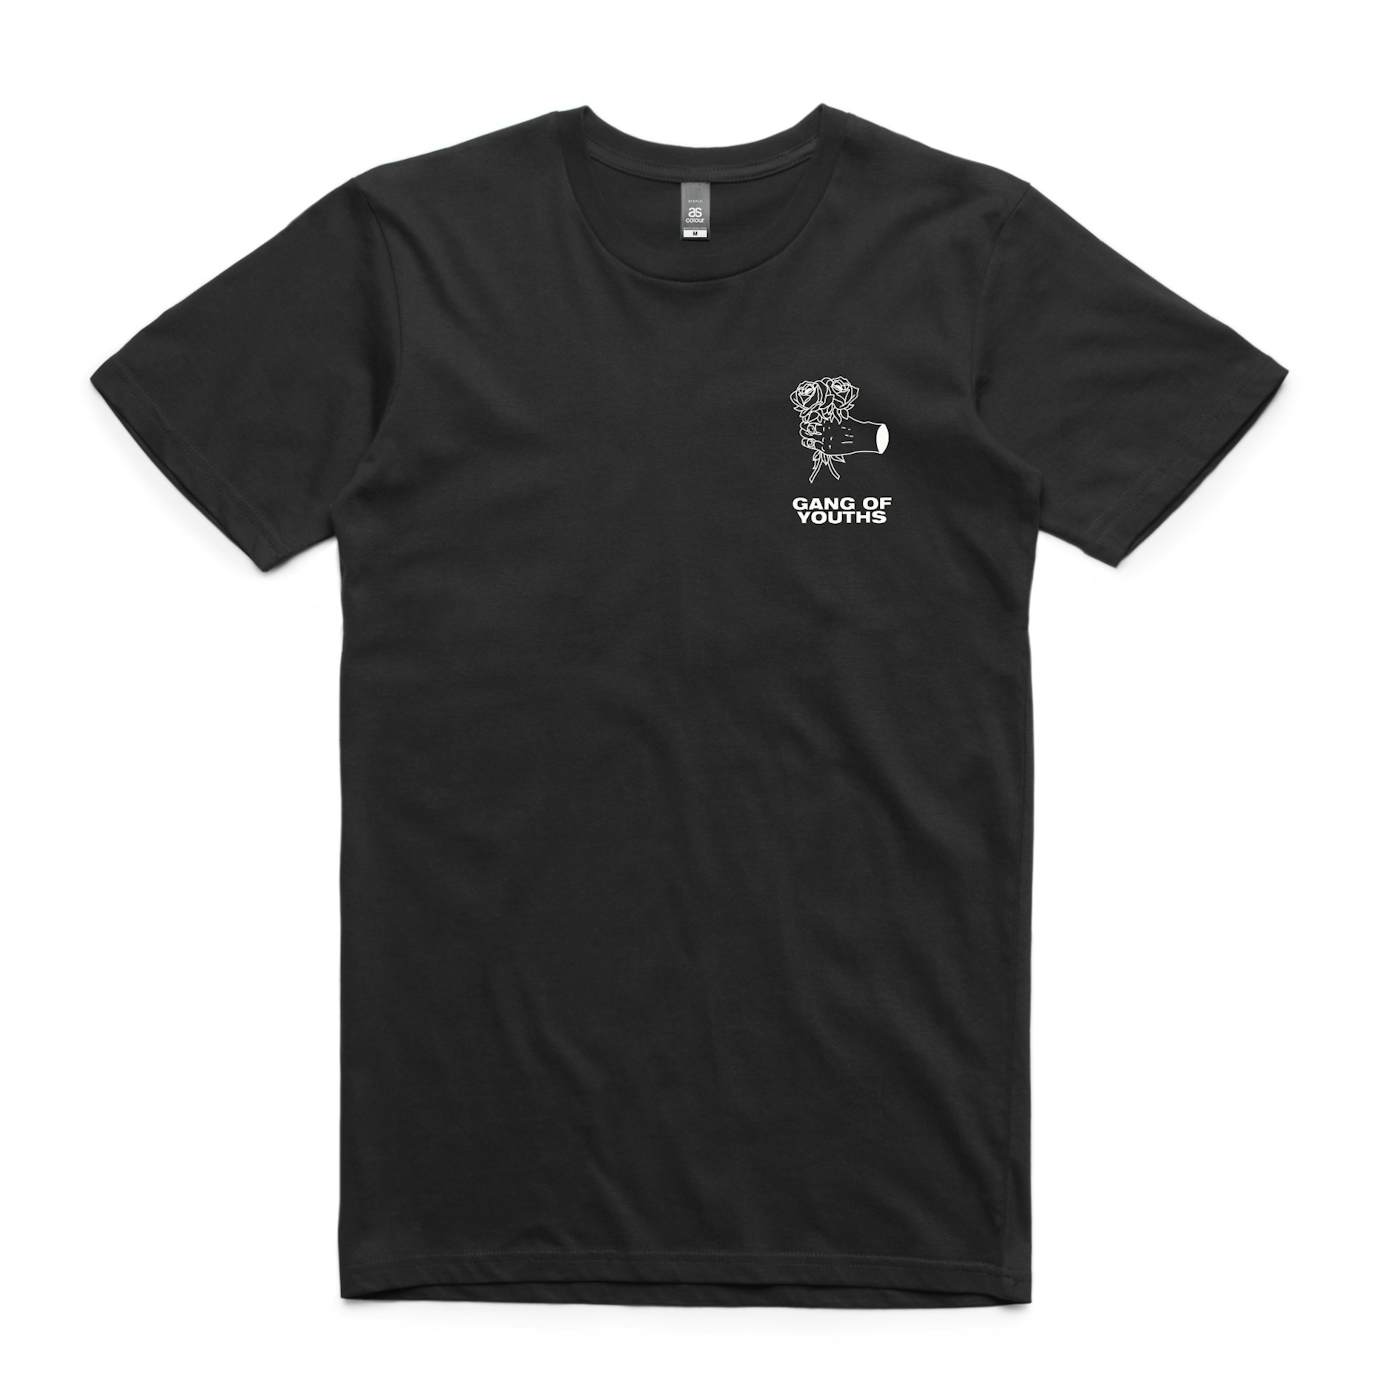 Gang of Youths - Black Drawn Flowers Tee